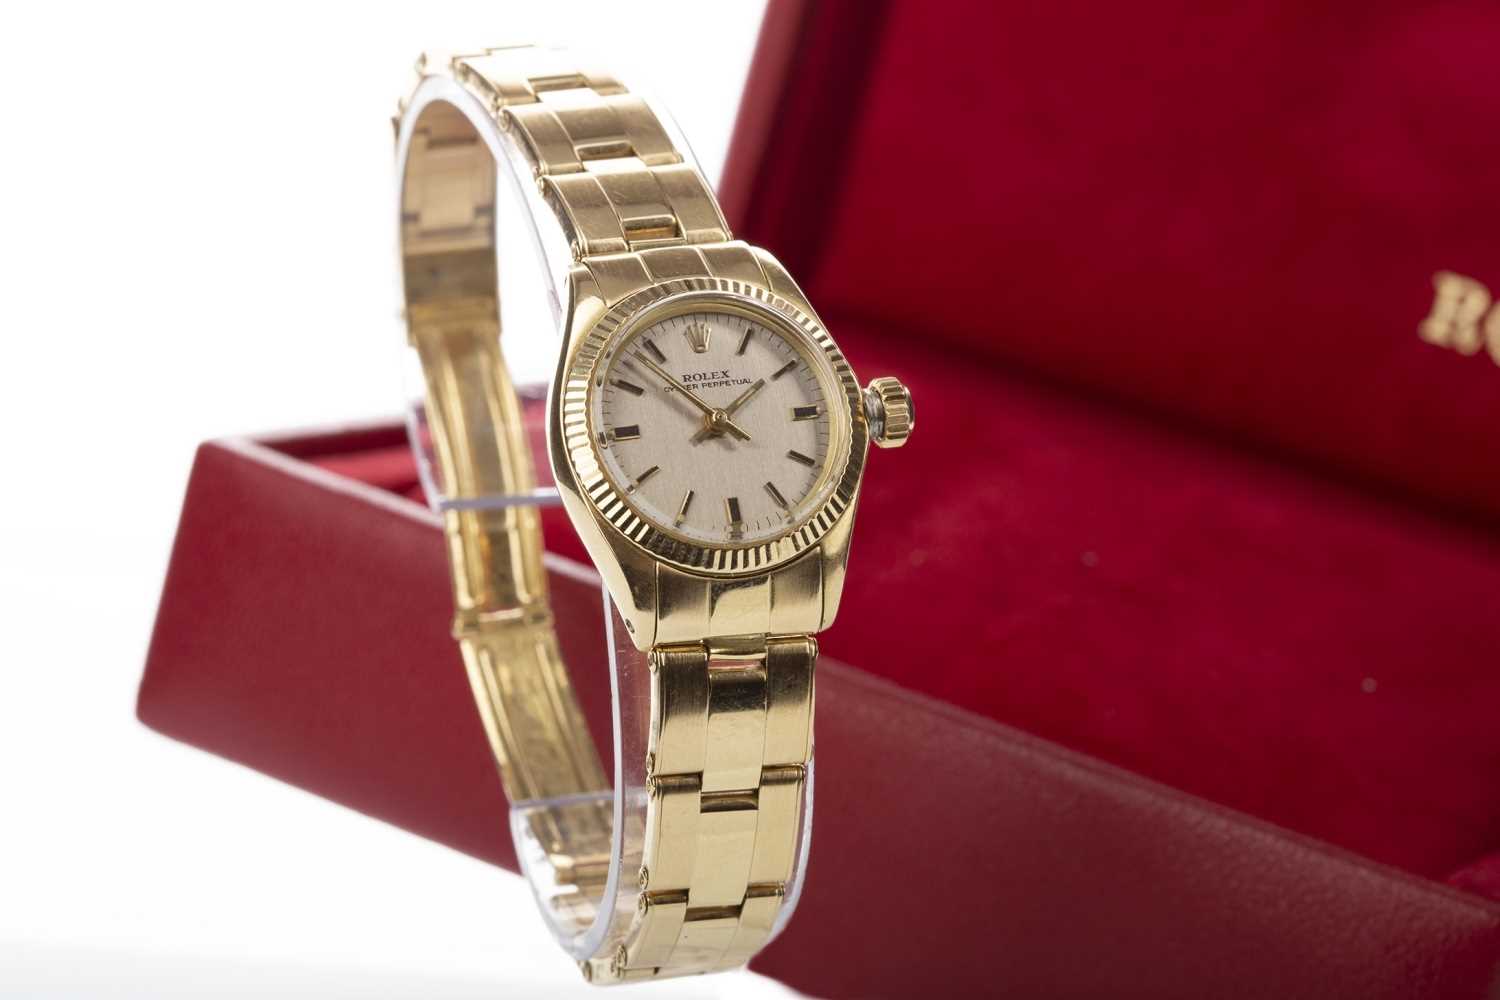 Lot 856 - A LADY'S ROLEX OYSTER PERPETUAL EIGHTEEN CARAT GOLD AUTOMATIC WRIST WATCH GOLD WATCH